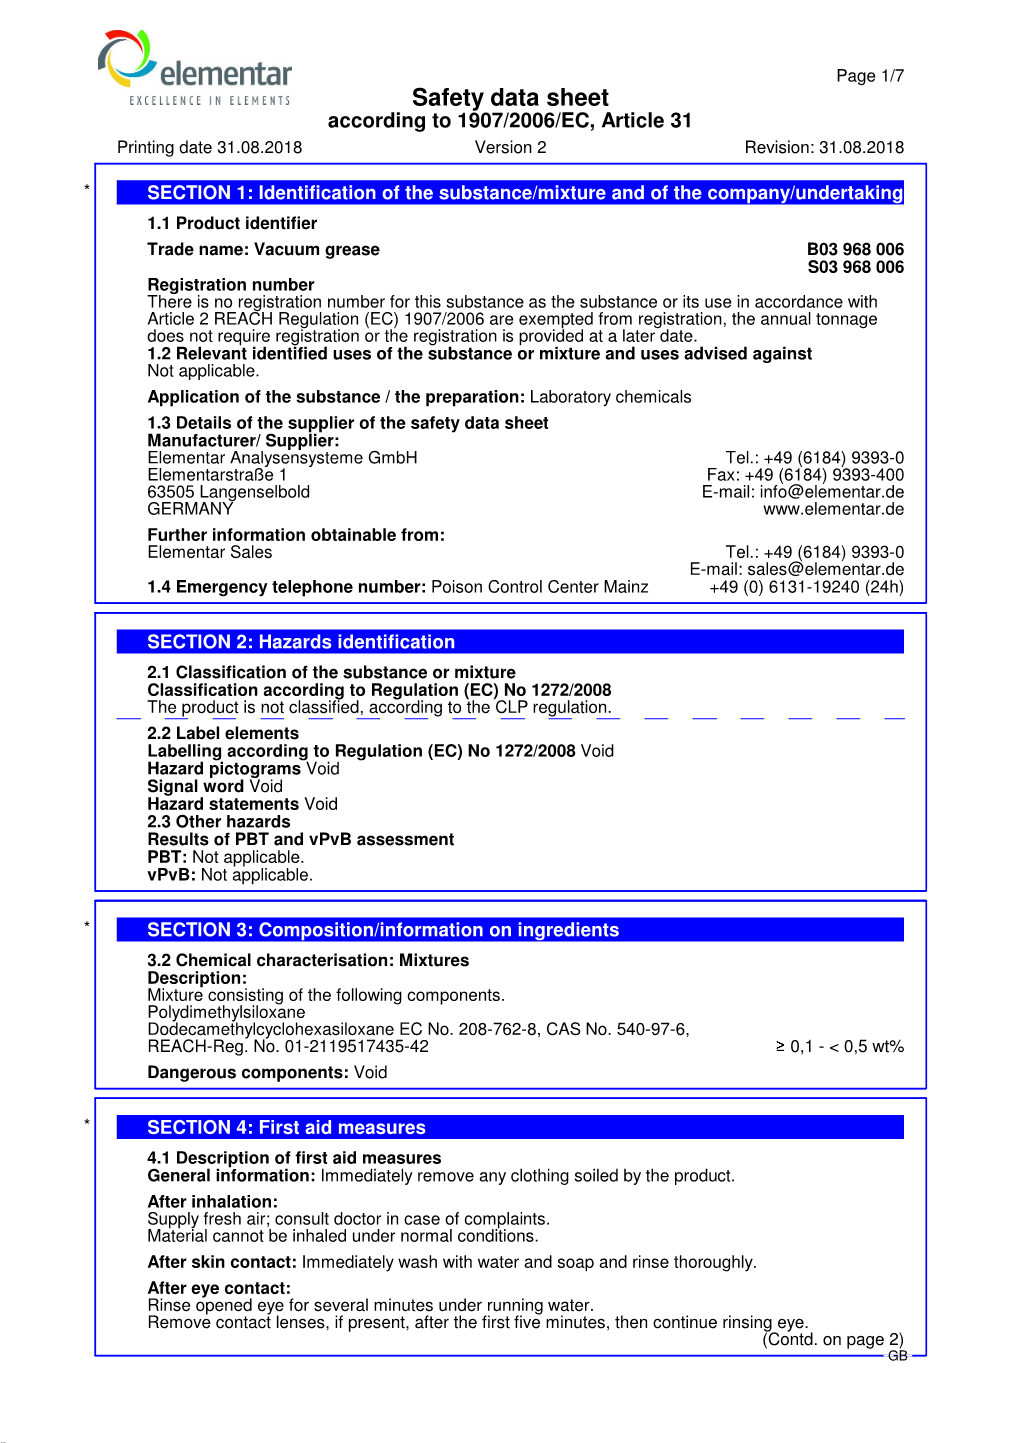 Safety Data Sheet According to 1907/2006/EC, Article 31 Printing Date 31.08.2018 Version 2 Revision: 31.08.2018